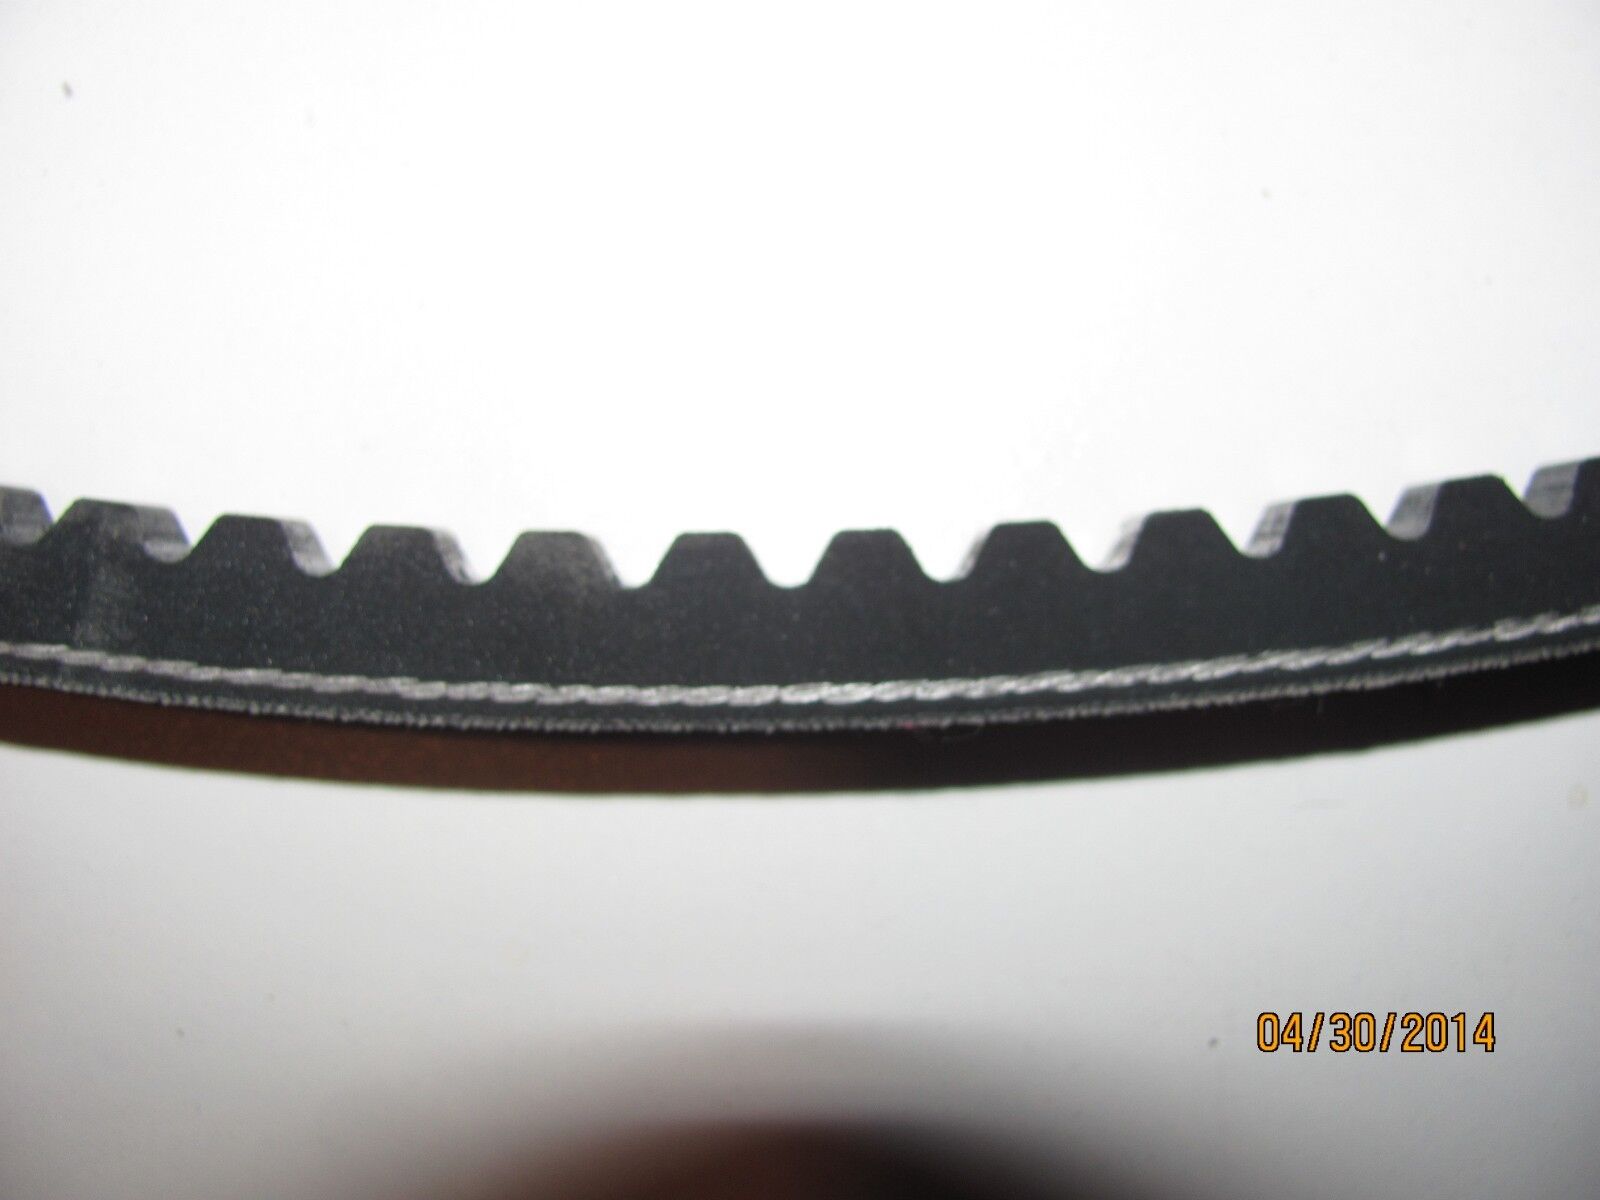 1 REPLACEMENT BELT FOR BEFCO C30-RD4 FOR 4' MOWERS- BEFCO 000-8630 PART #